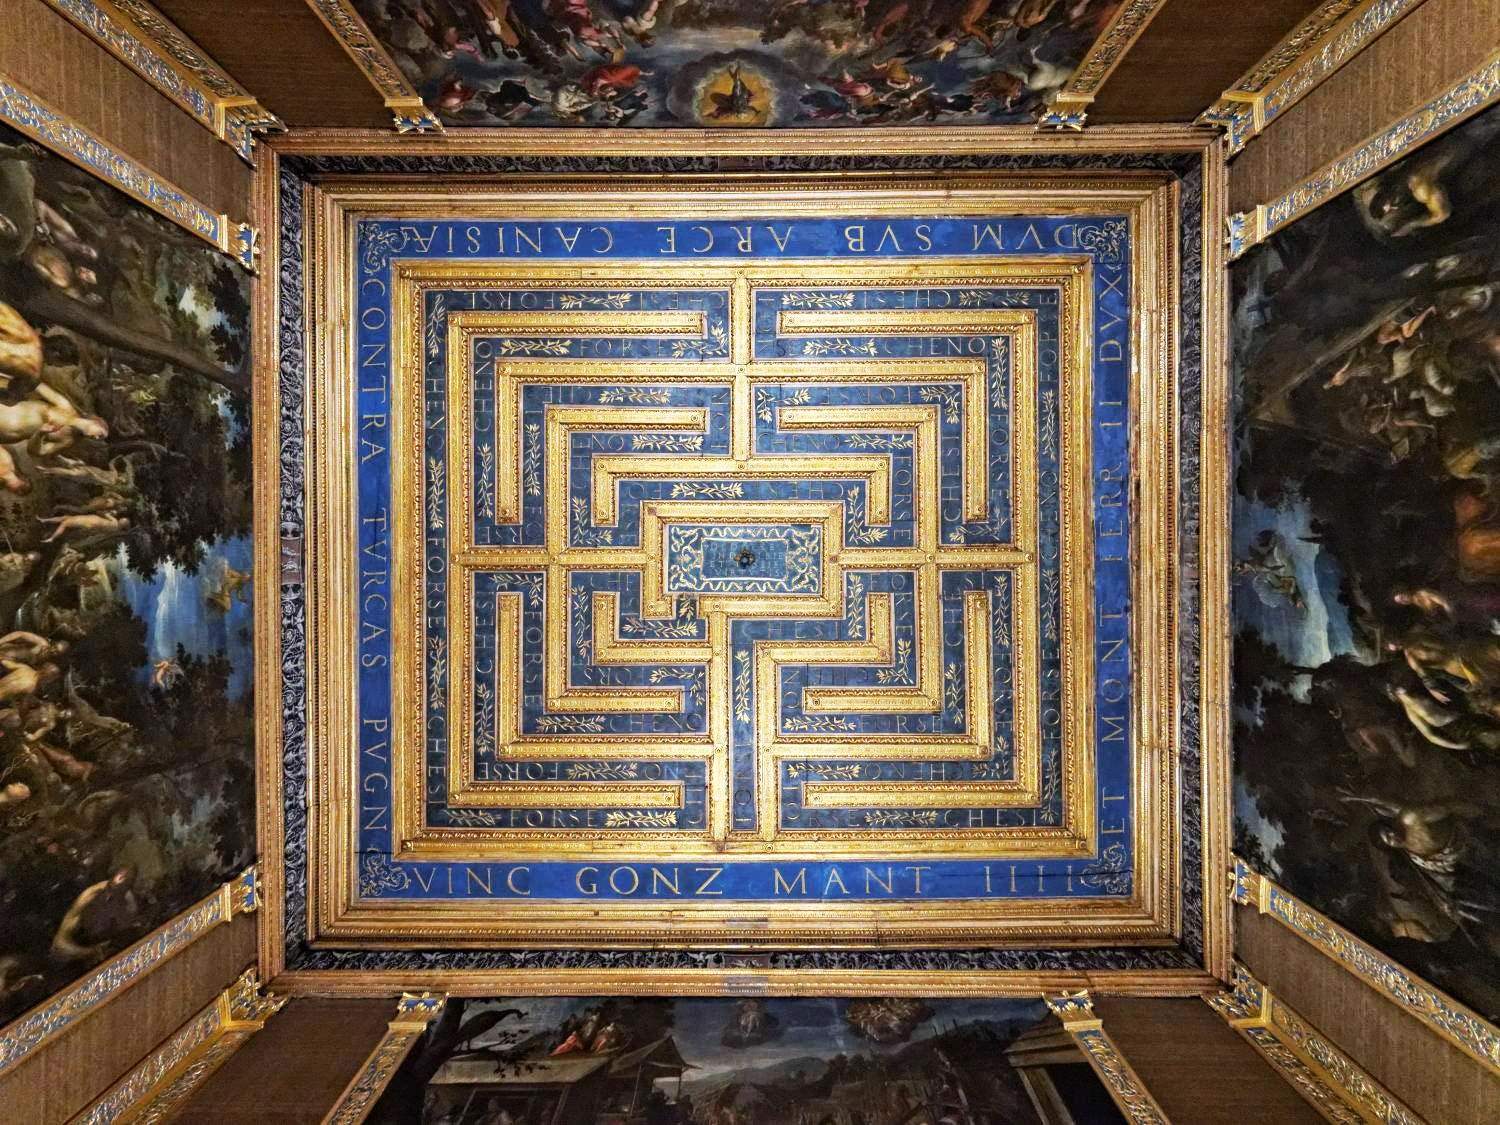 The labyrinths of Mantua, between the Ducal Palace and the Virgilian Woods